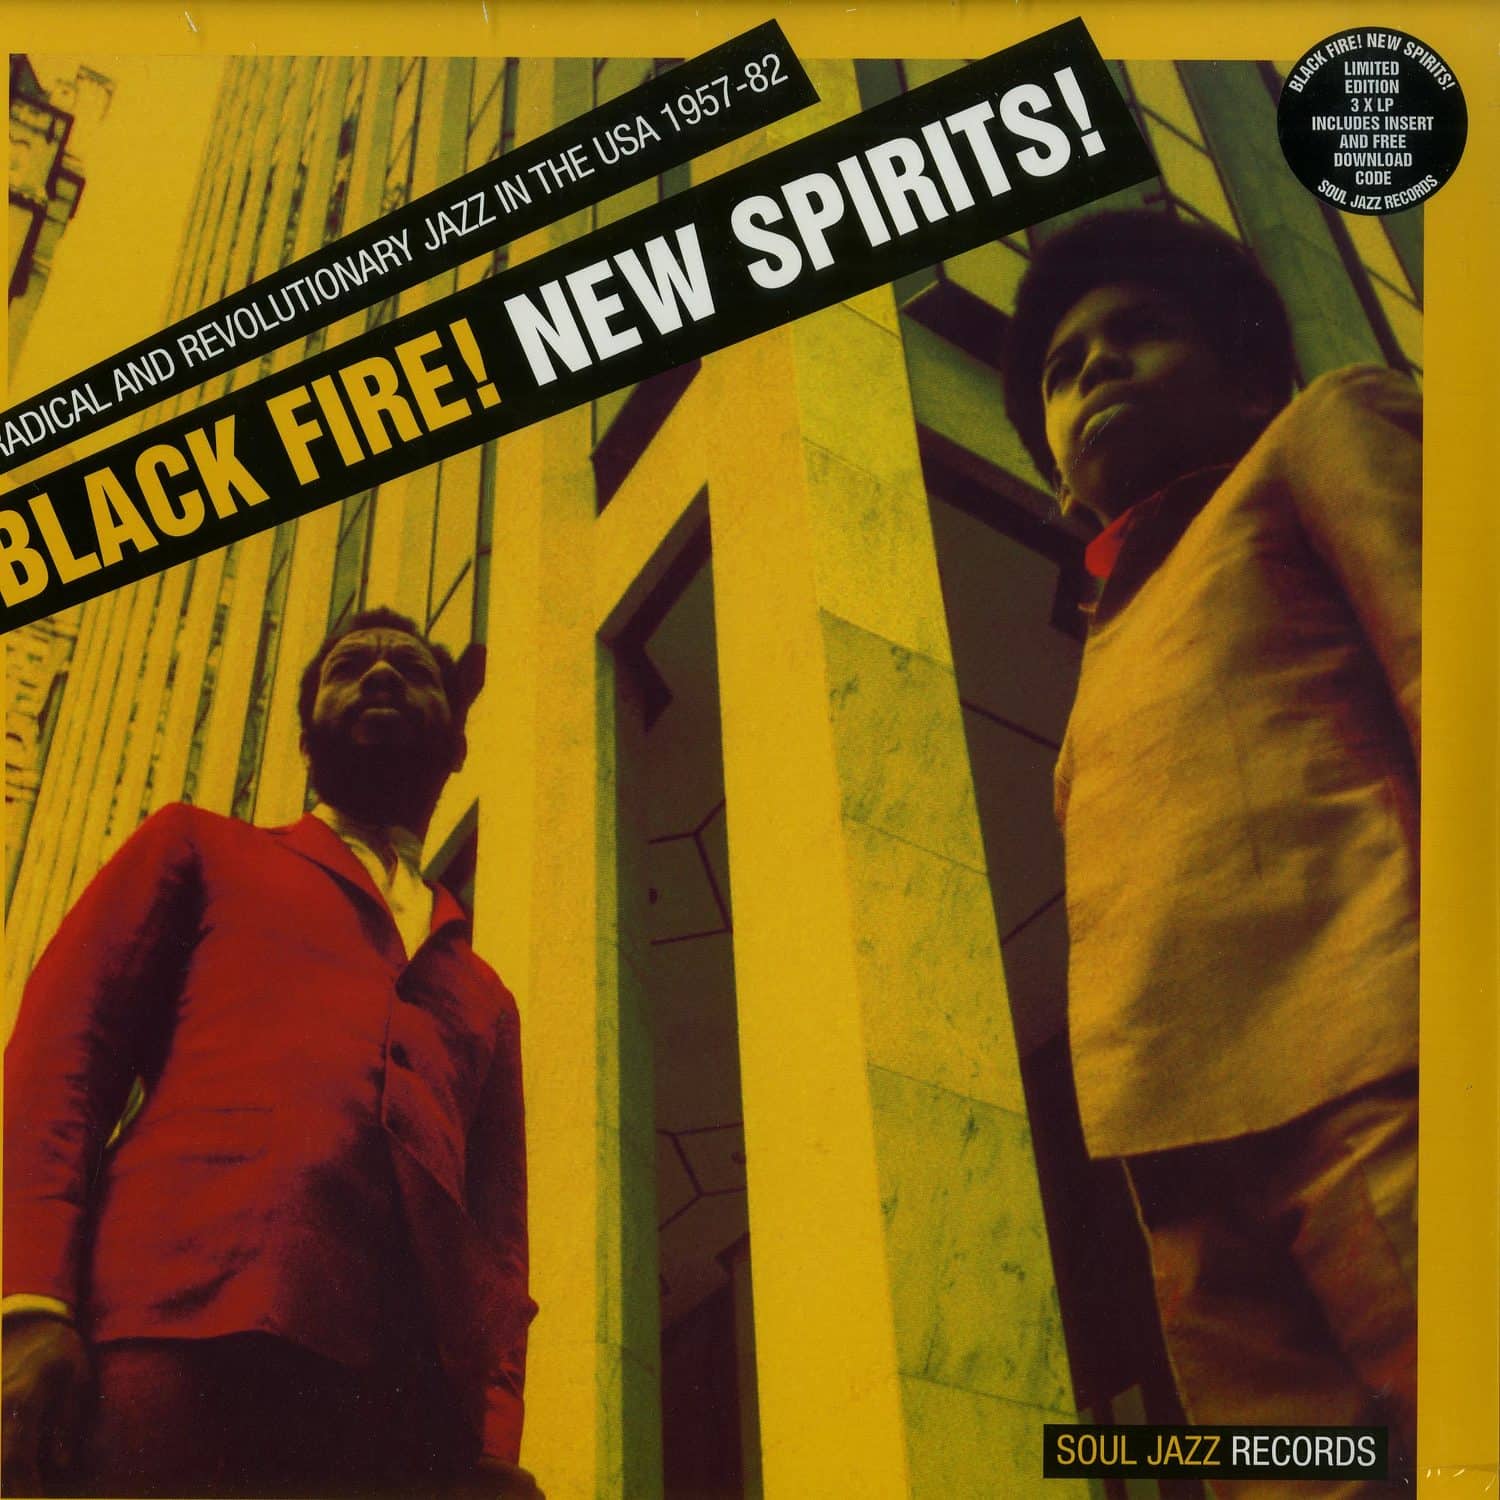 Various Artists - BLACK FIRE! NEW SPIRITS! RADICAL AND REVOLUTIONARY JAZZ IN THE USA 1957 - 1982 